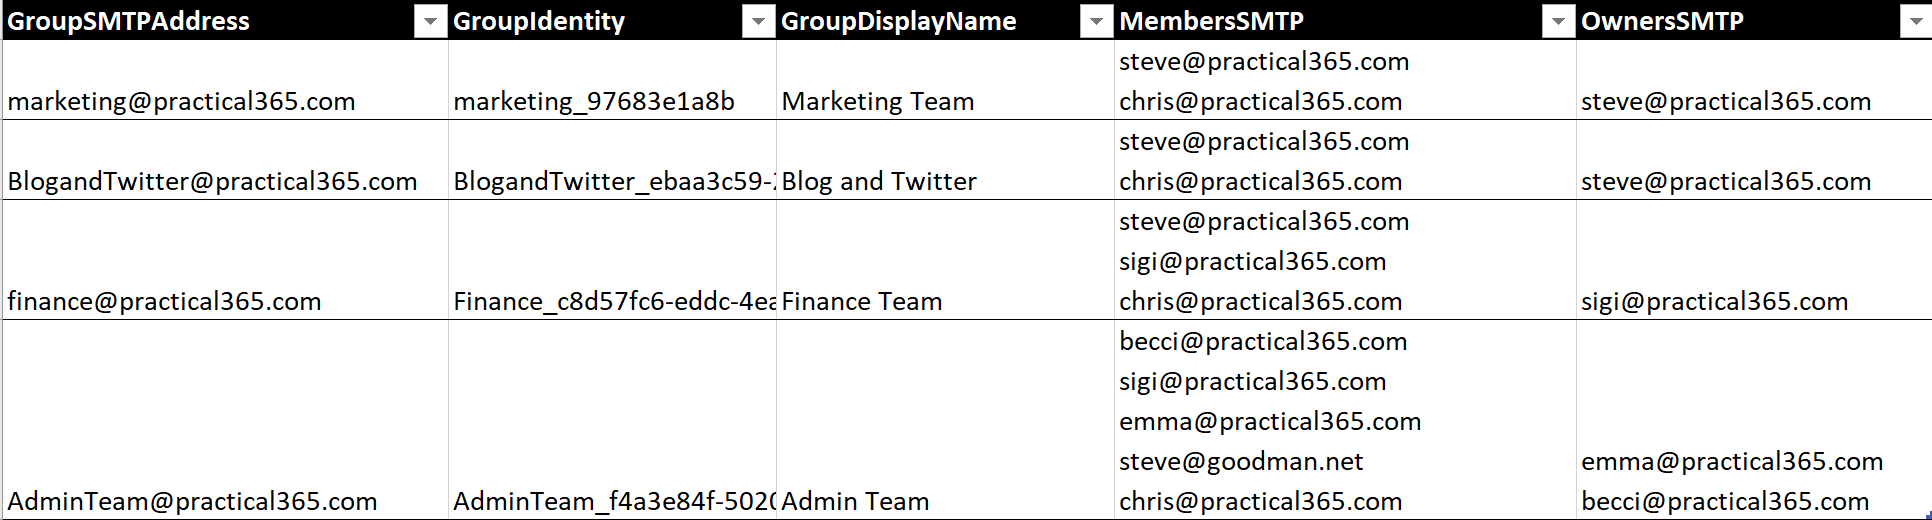 Exporting Office 365 Group membership to a CSV file